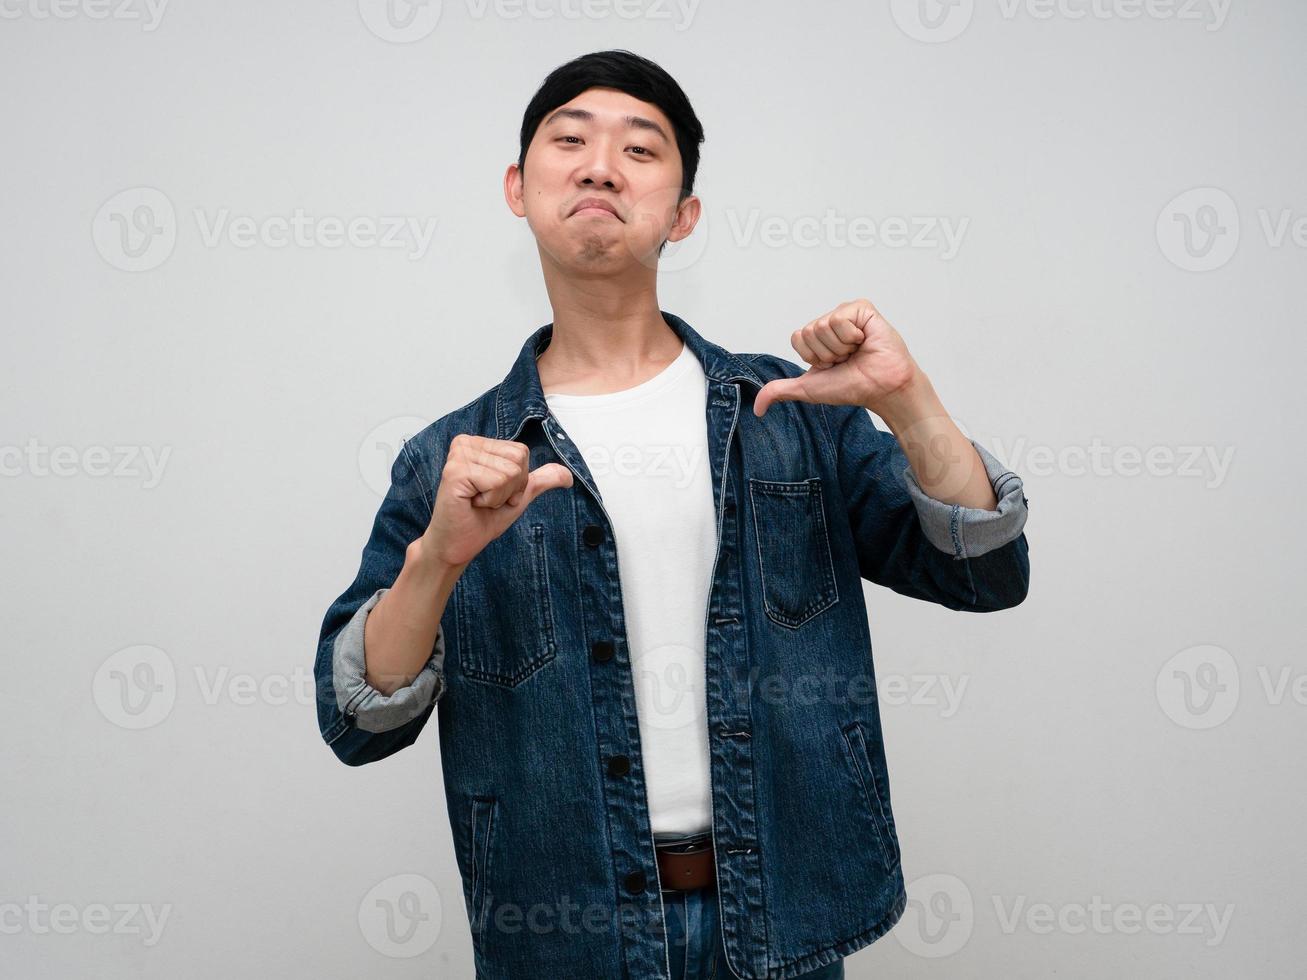 Asian man jeans shirt gesture point finger at himself arrogant isolated photo